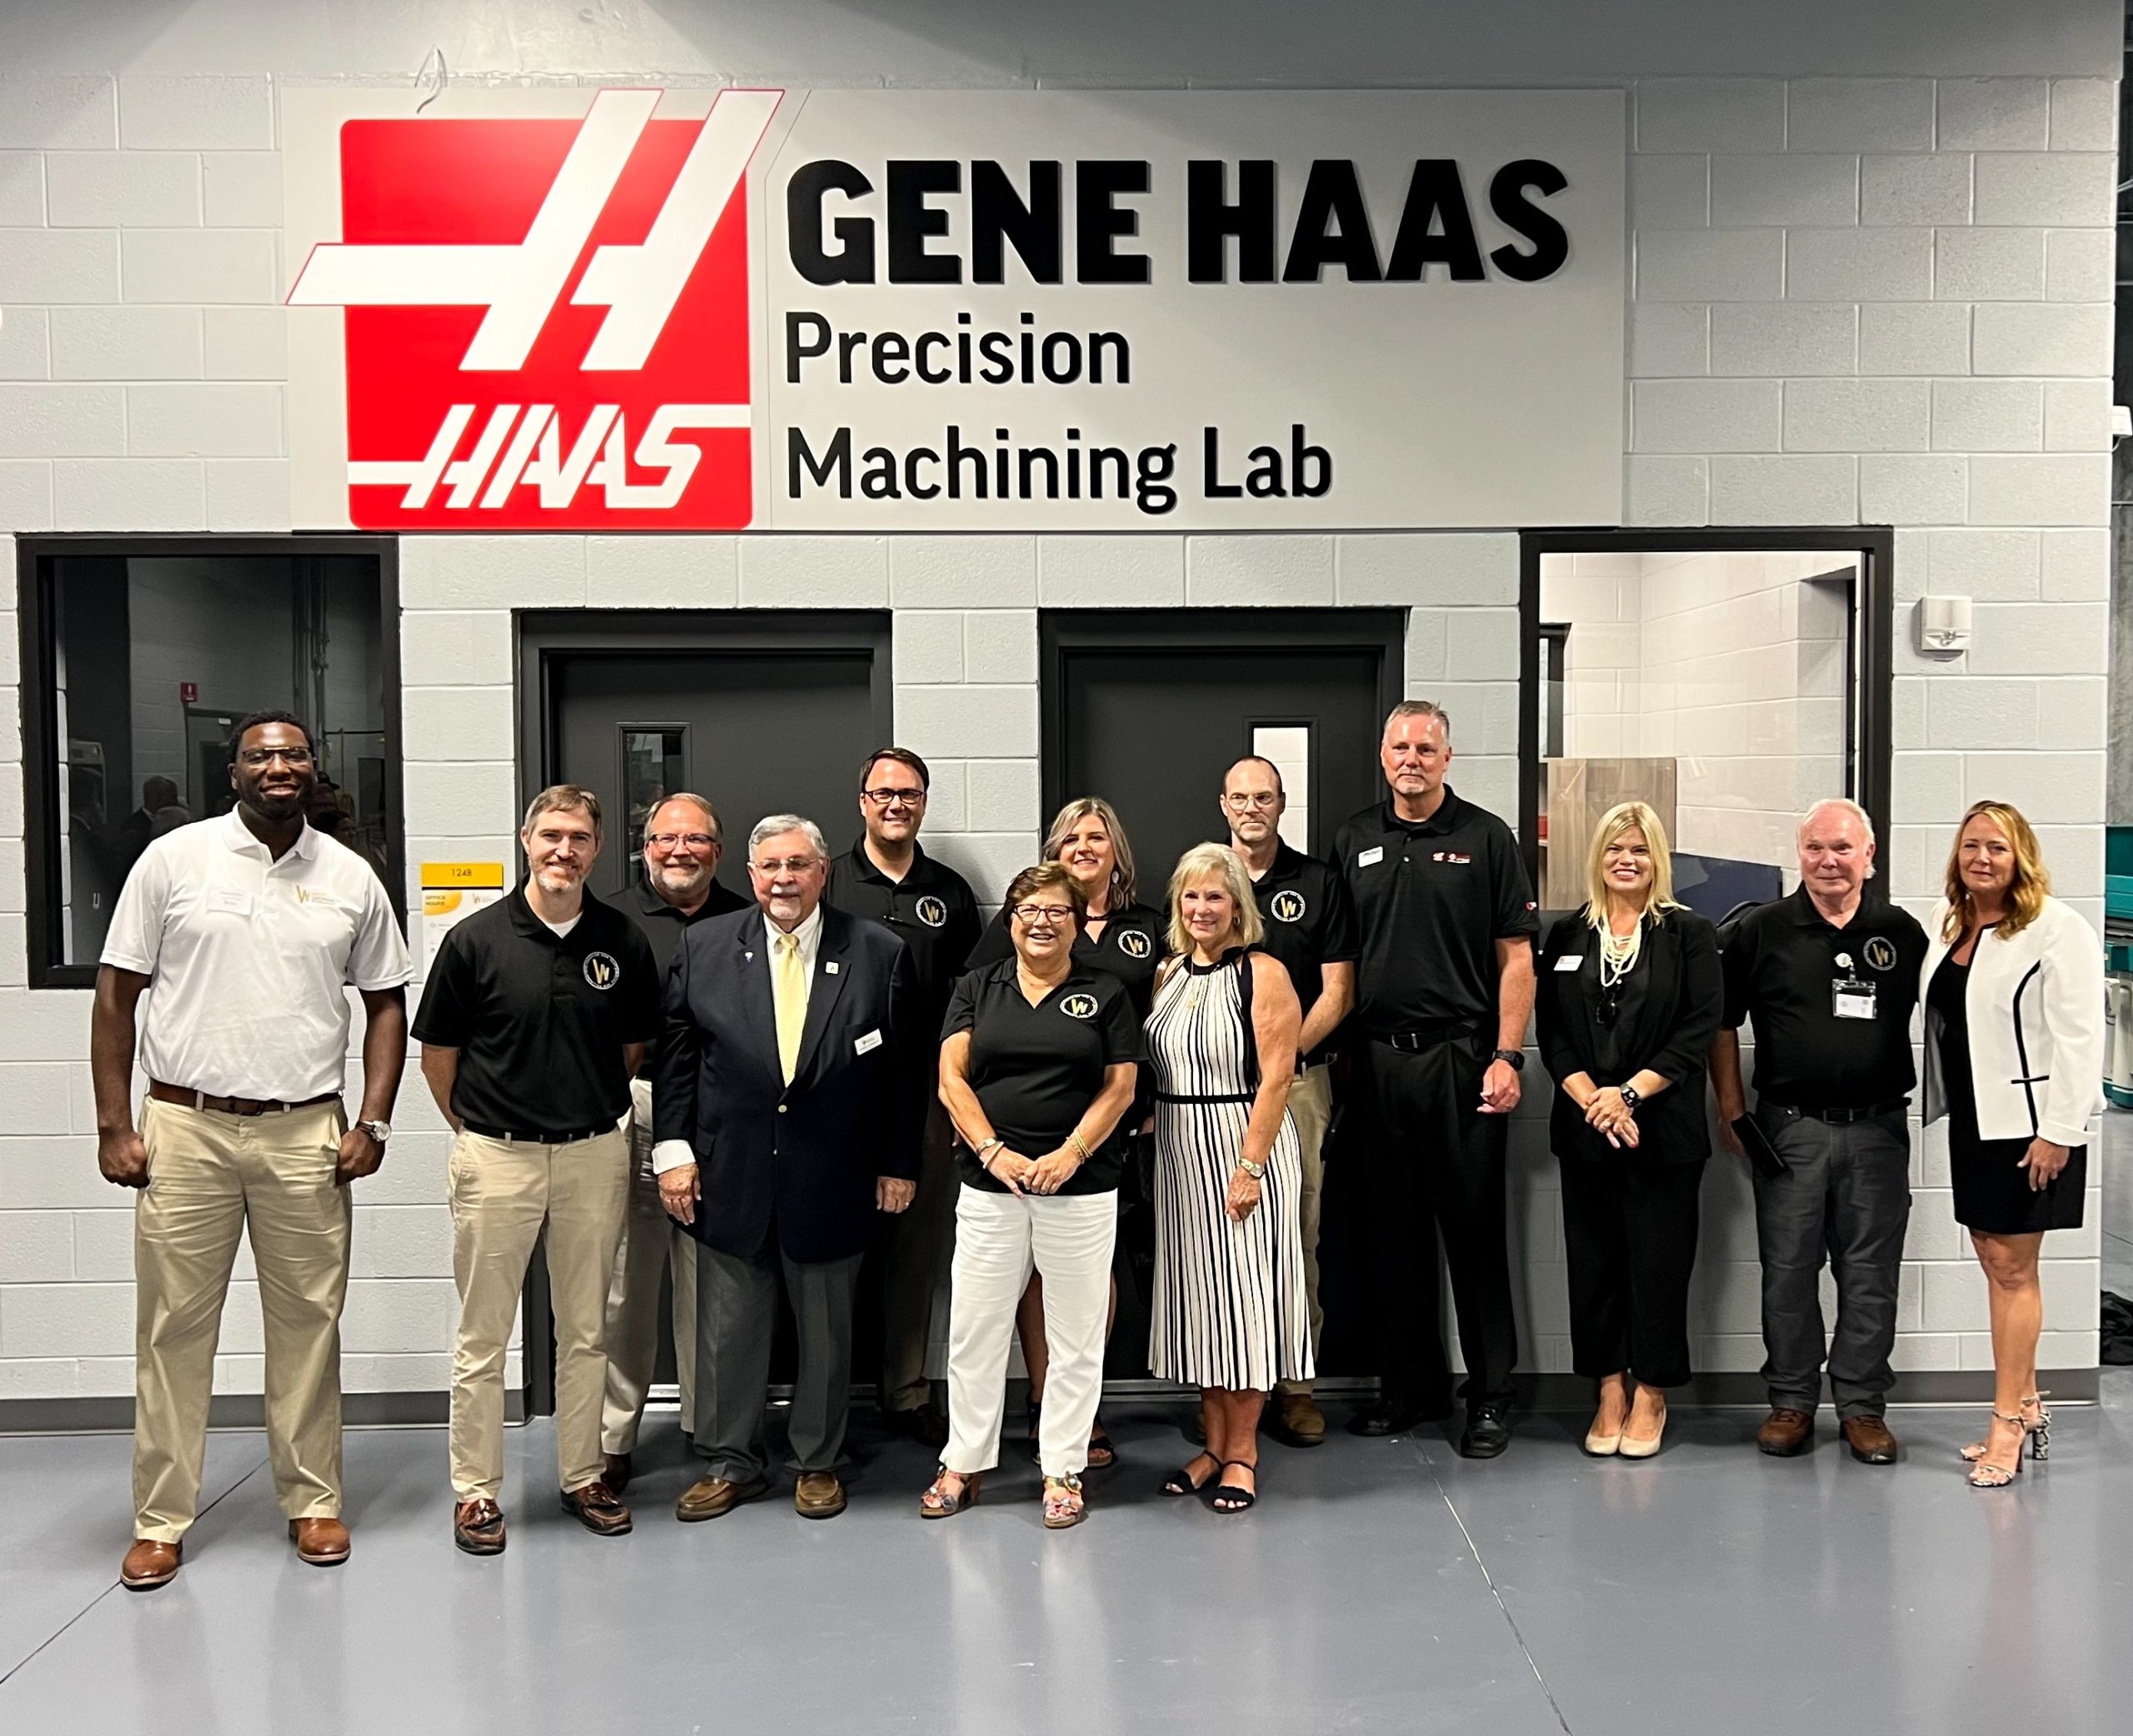 Individuals standing in front of Haas Precision Machining Lab